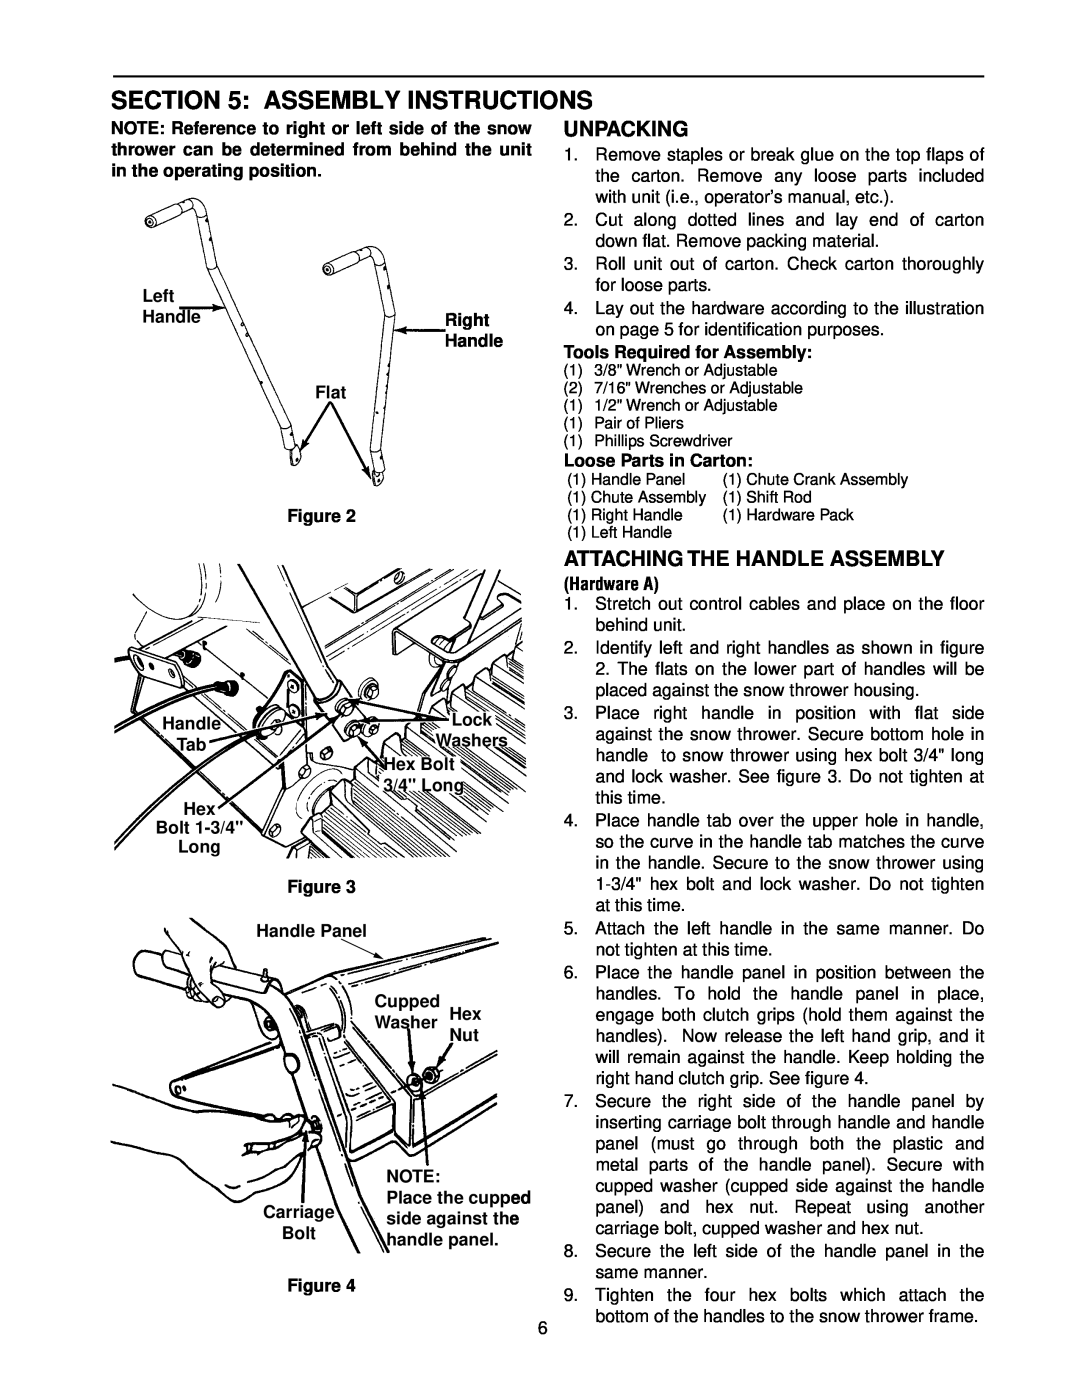 MTD E740, E760 manual Assembly Instructions, Unpacking, Attaching The Handle Assembly 